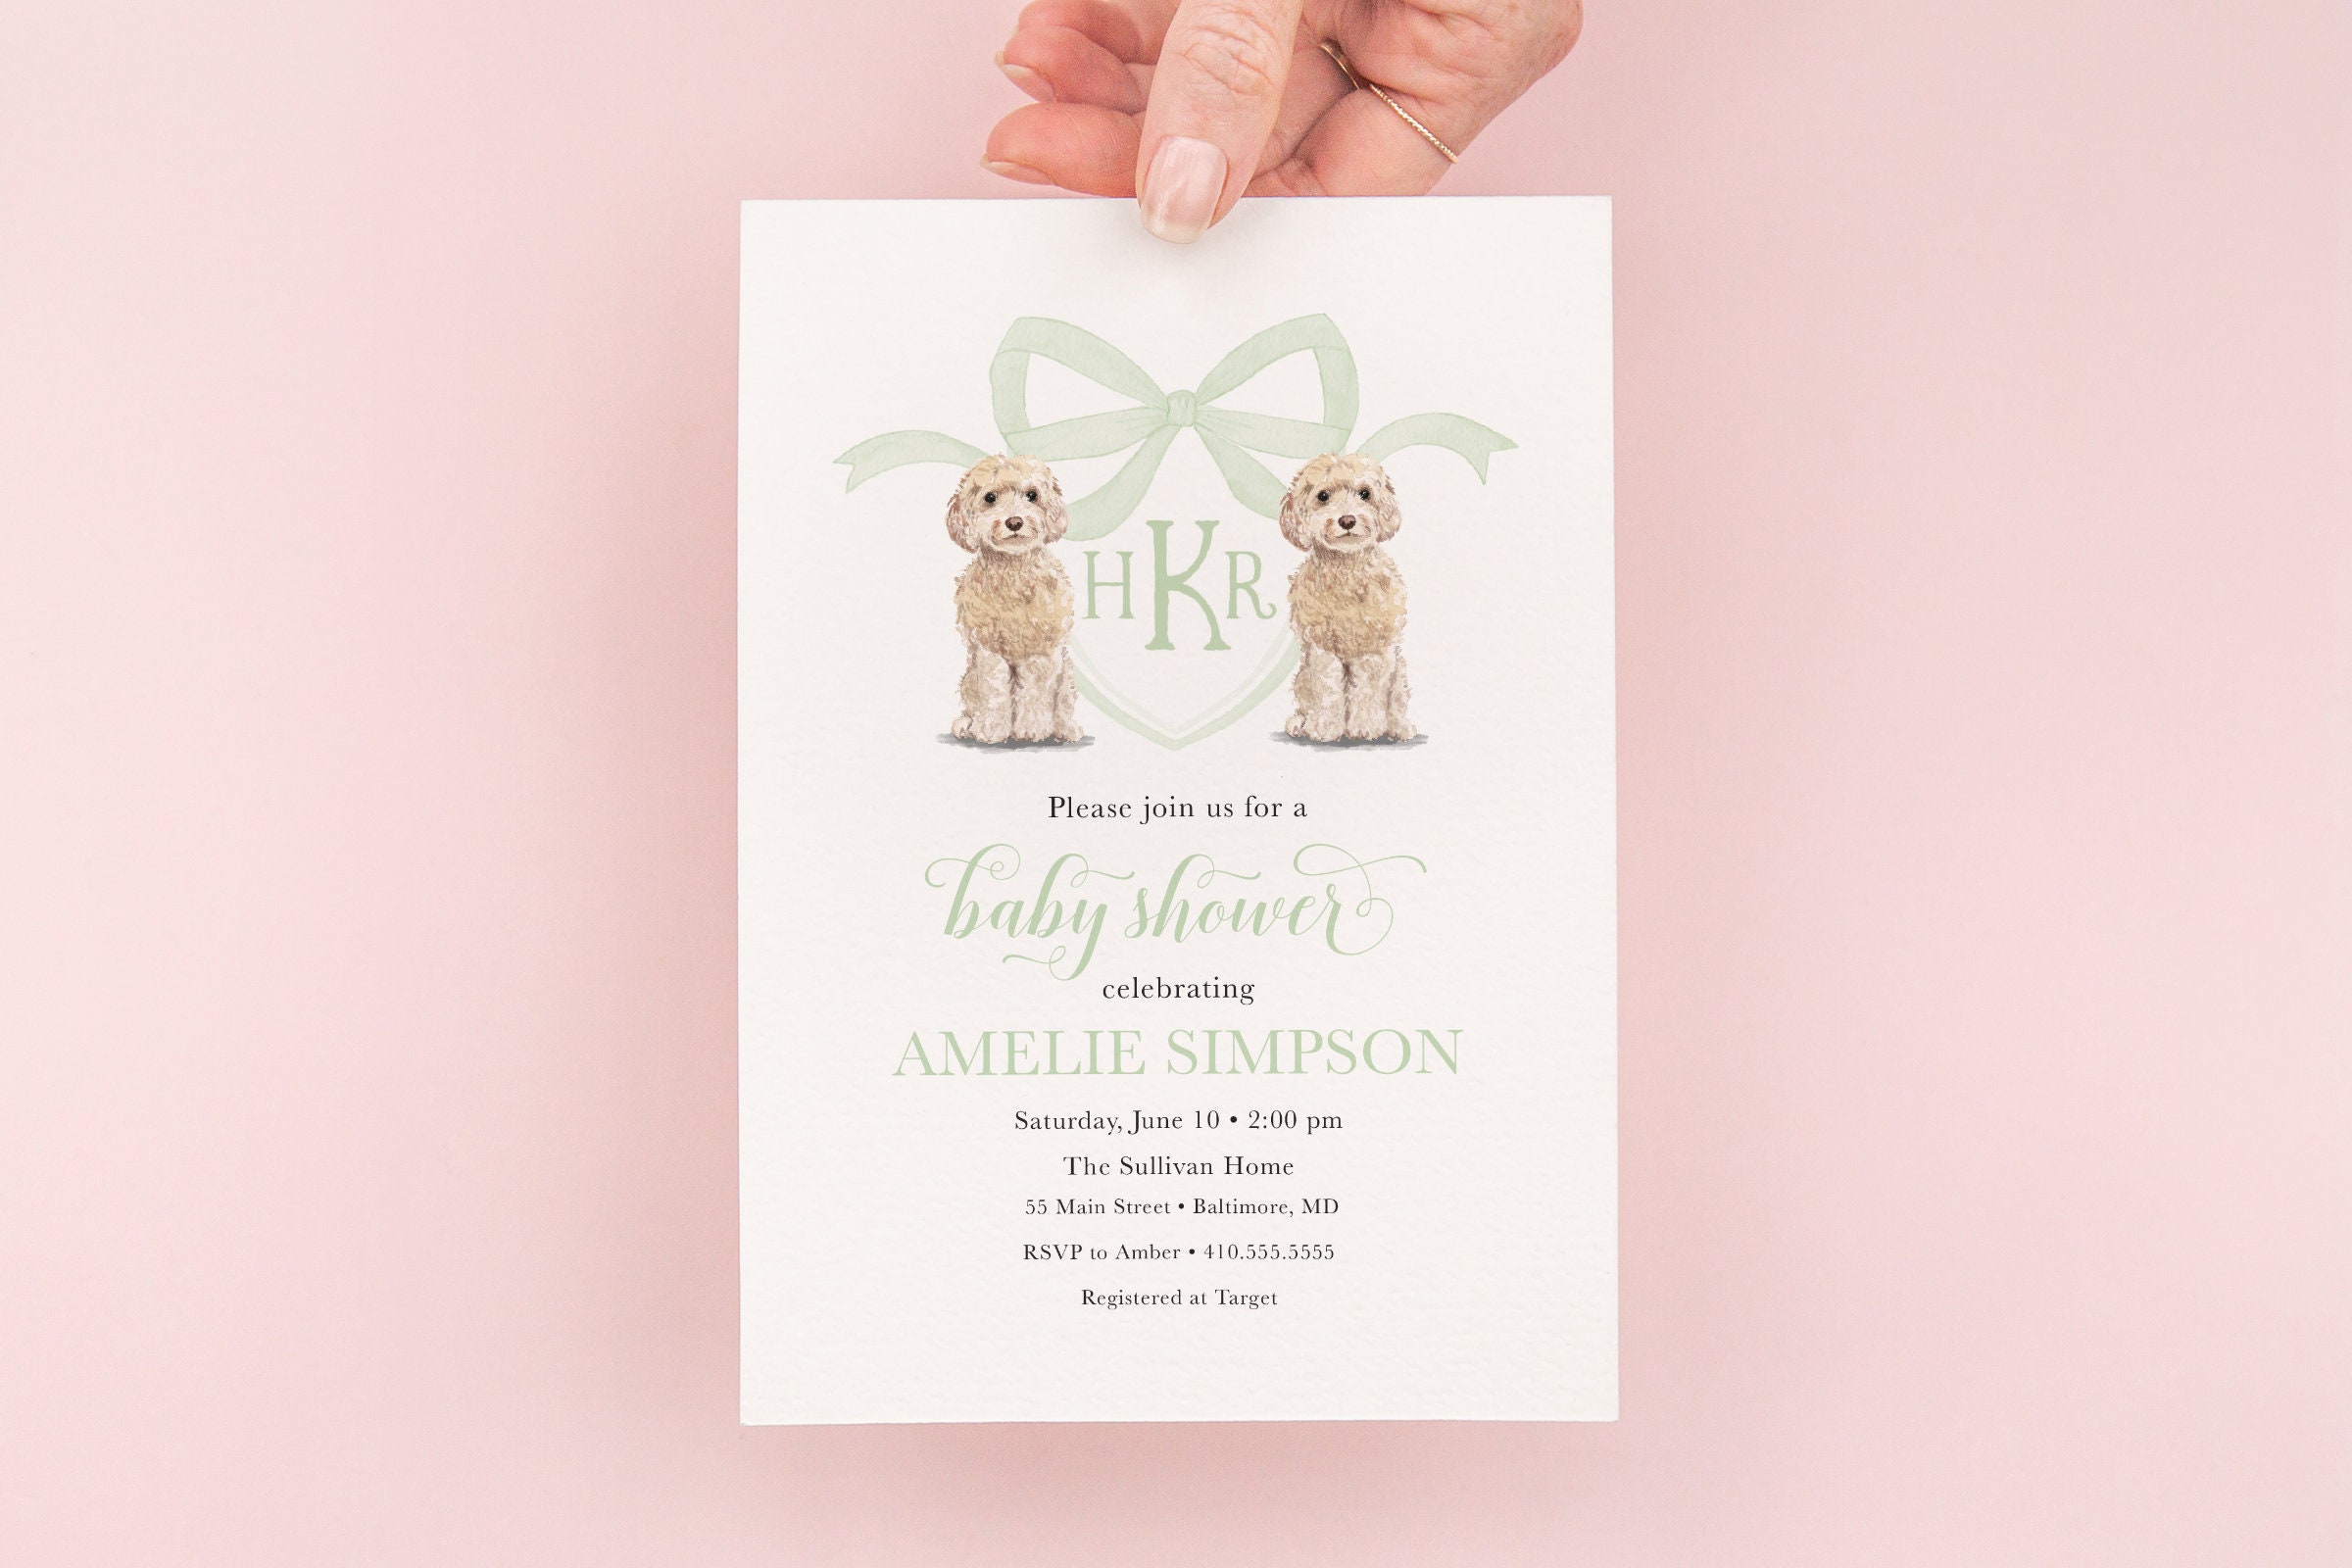 Details about   brother sister design studio baby shower party invitations w/ envelops animal 